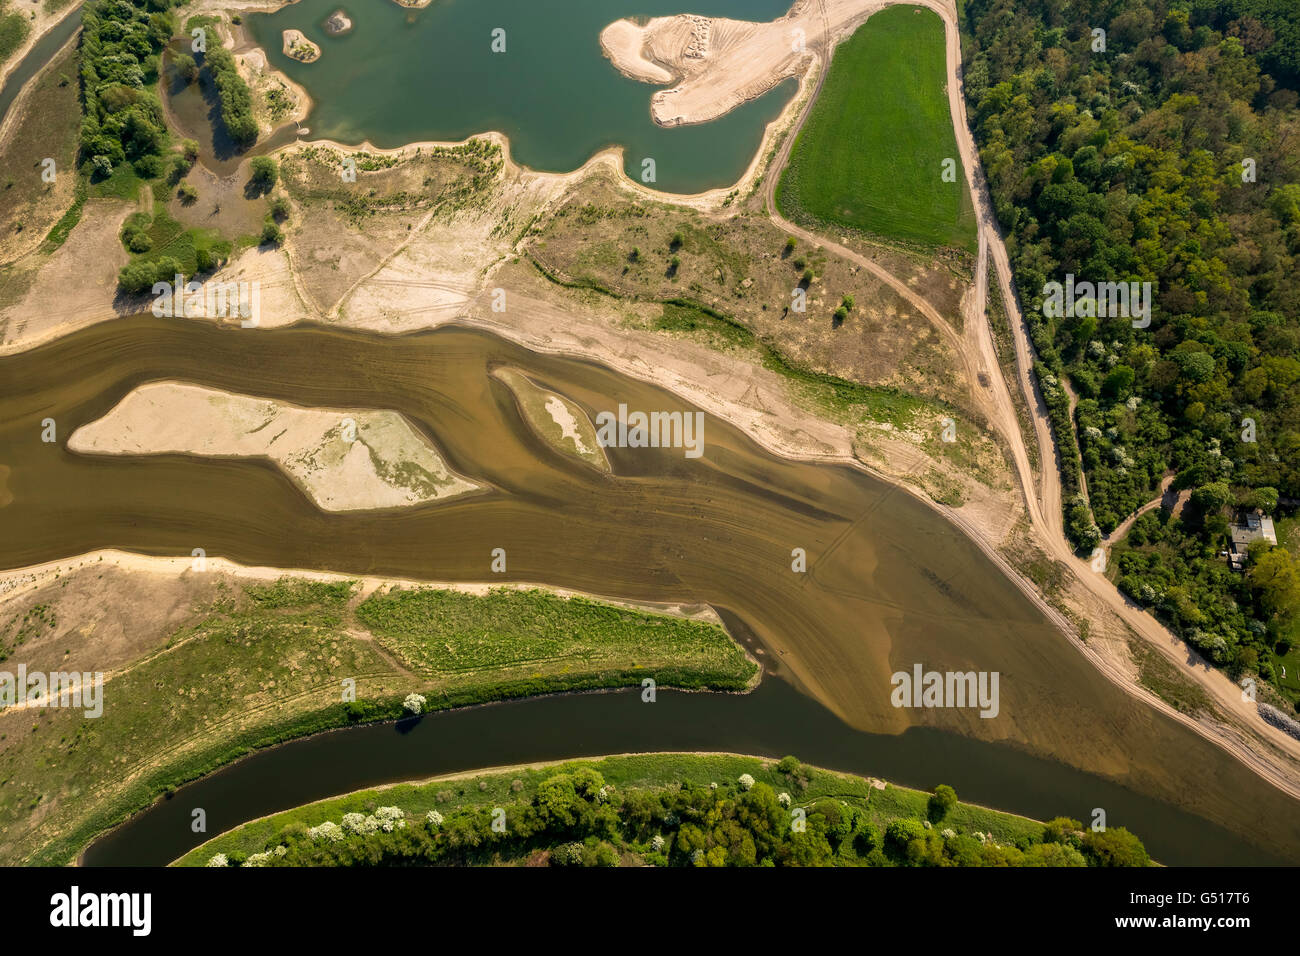 Aerial view, reconstruction of Lippe mouth by Lippeverband, Lippe River, Wesel, Rhine, Ruhr region, North Rhine Westphalia, Stock Photo